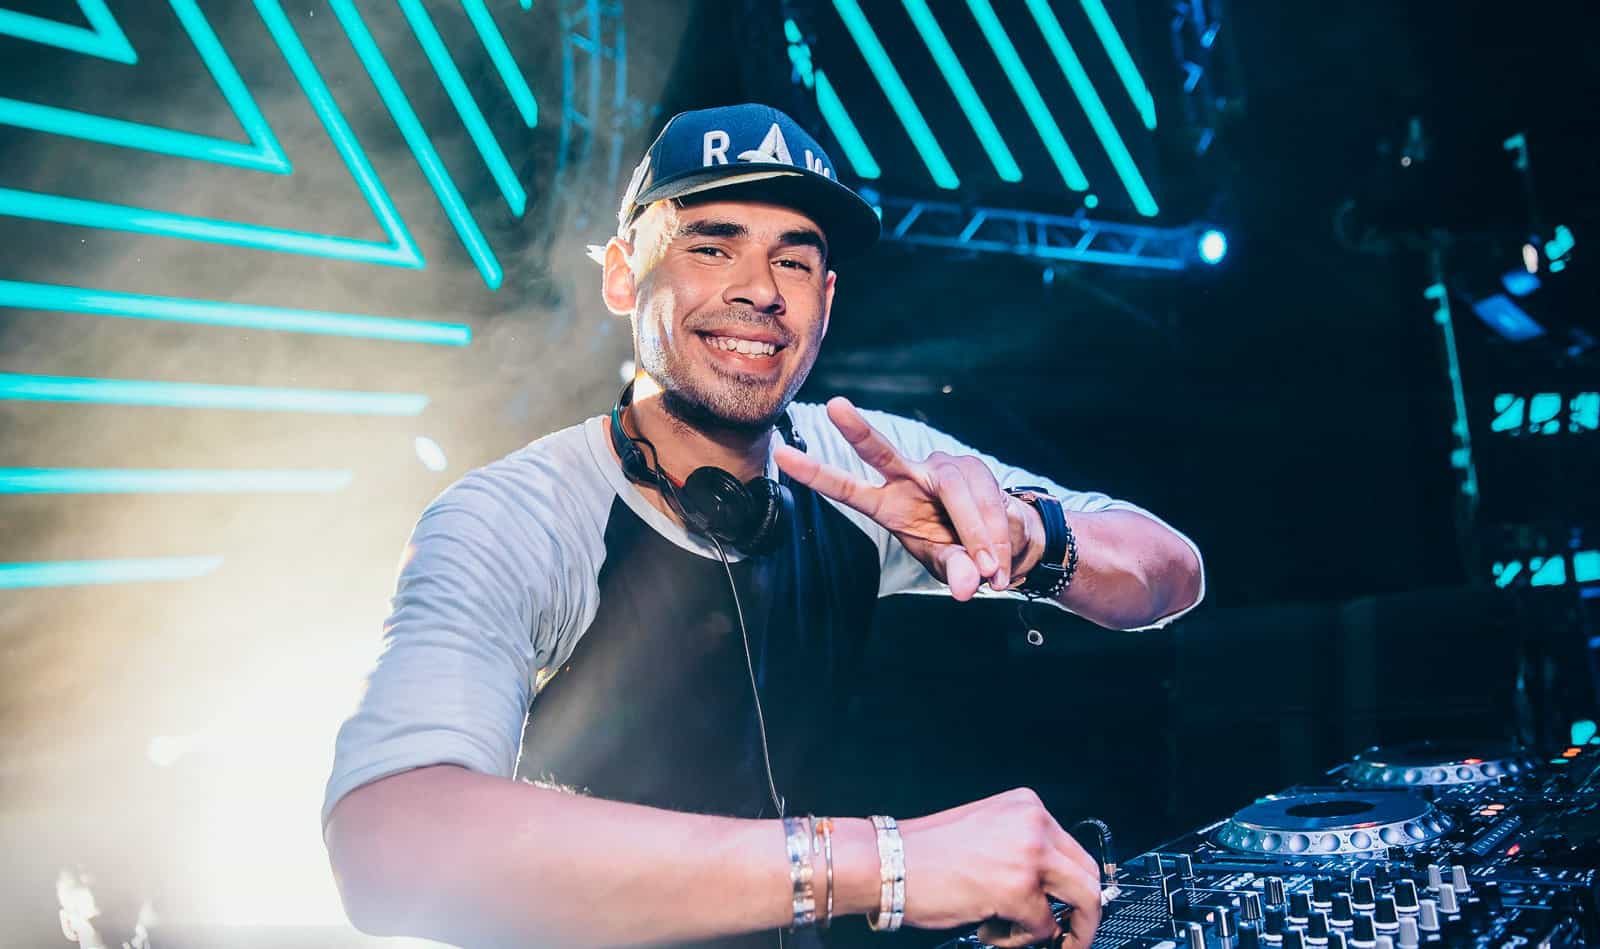 Afrojack lanza "Off the Wall" junto a EMAD